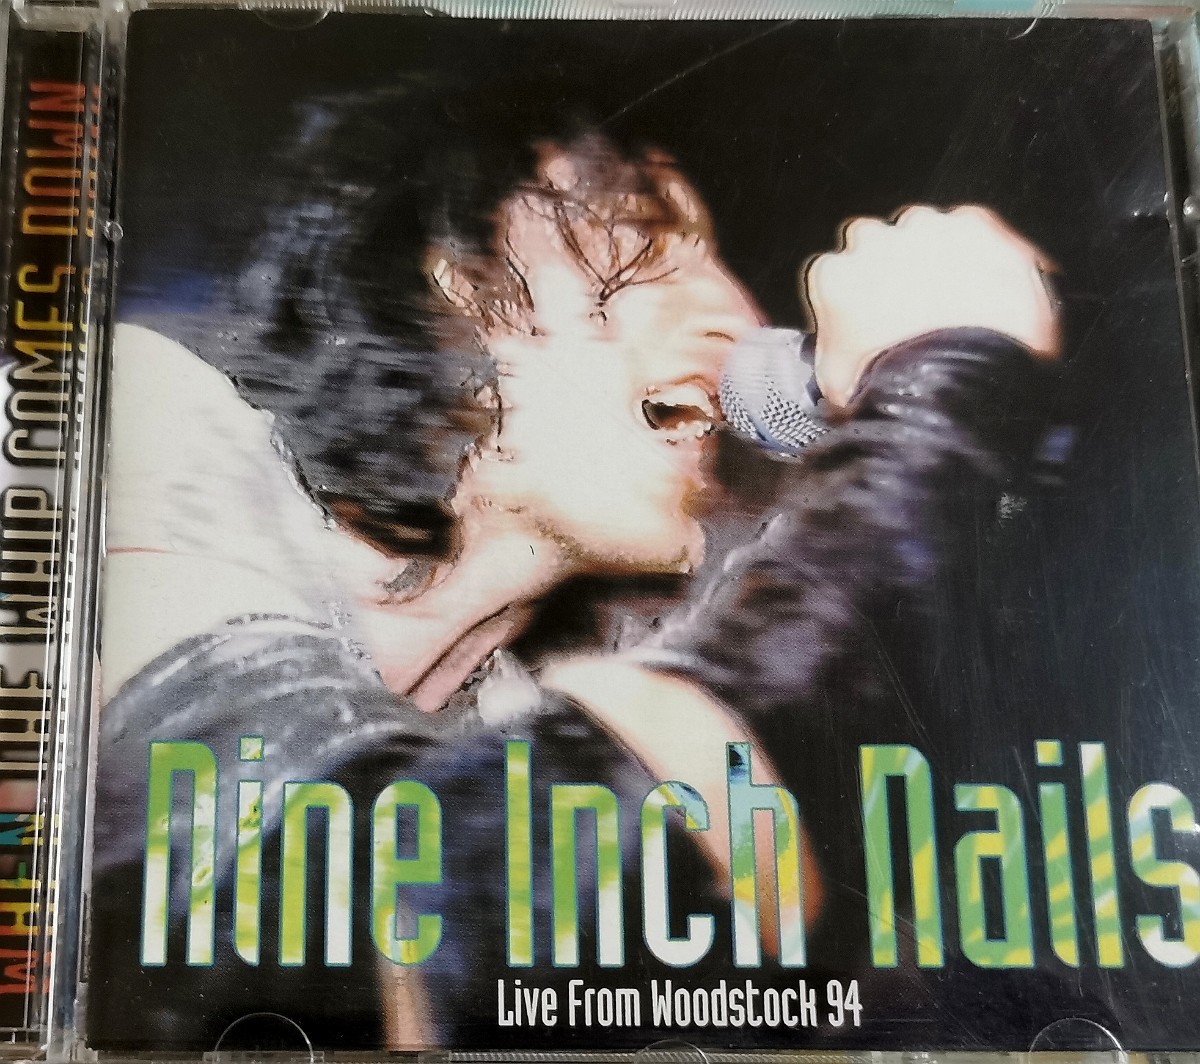 [NINE INCH NAILS/WHEN THE WHIP COMES DOWN: LIVE FROM WOODSTOCK 94] NIN/na in * дюймовый * ногти z/ private запись CD/ Live запись 